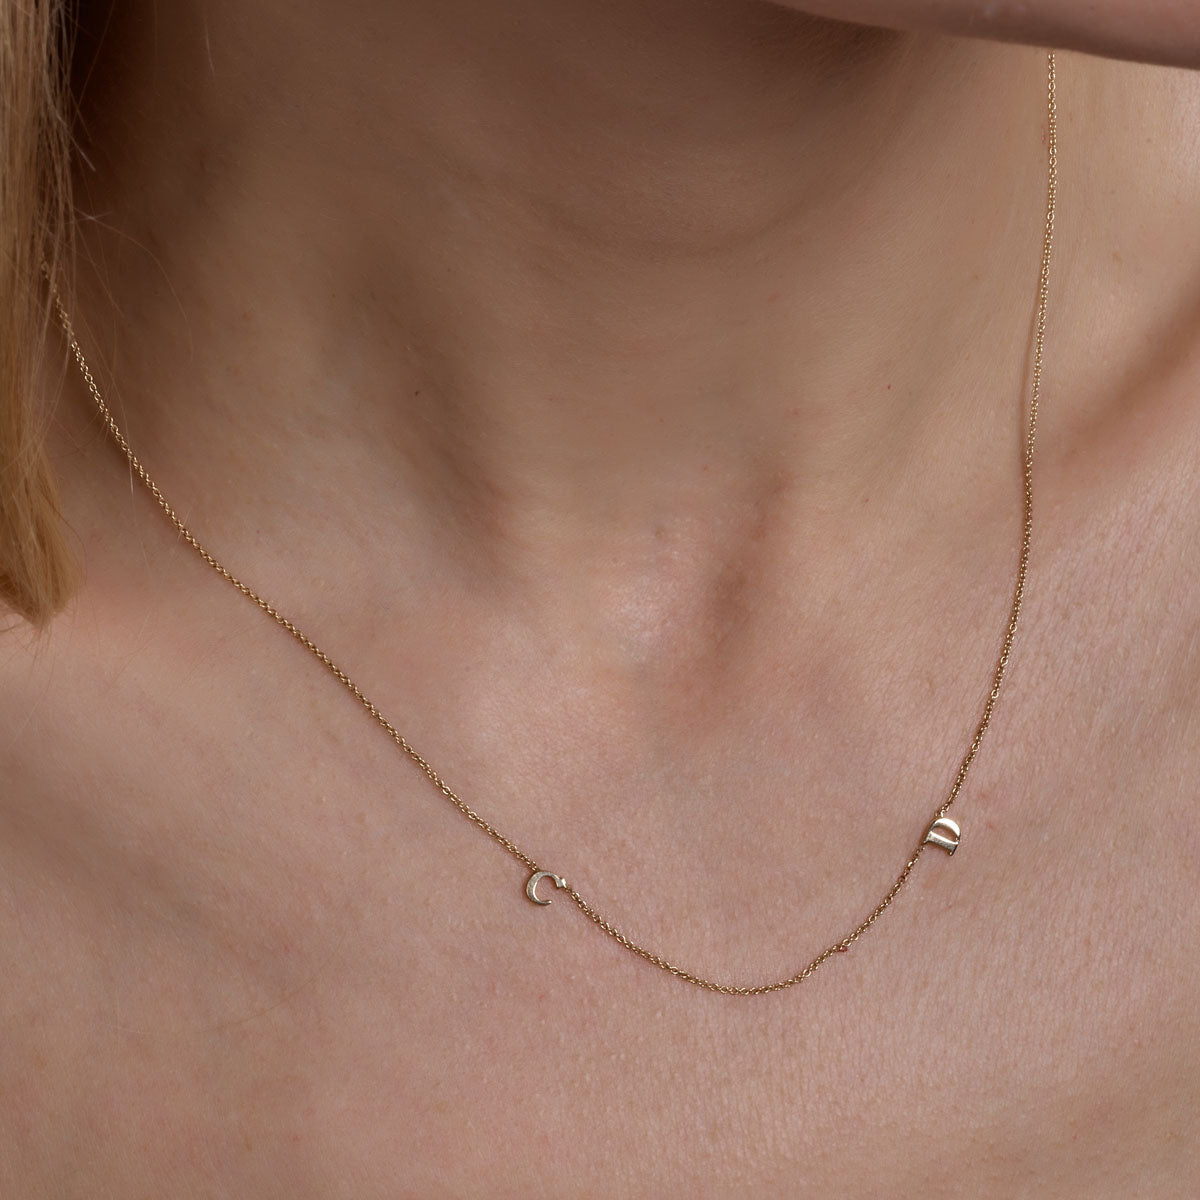 gold 2 letter initial necklace on womans neck